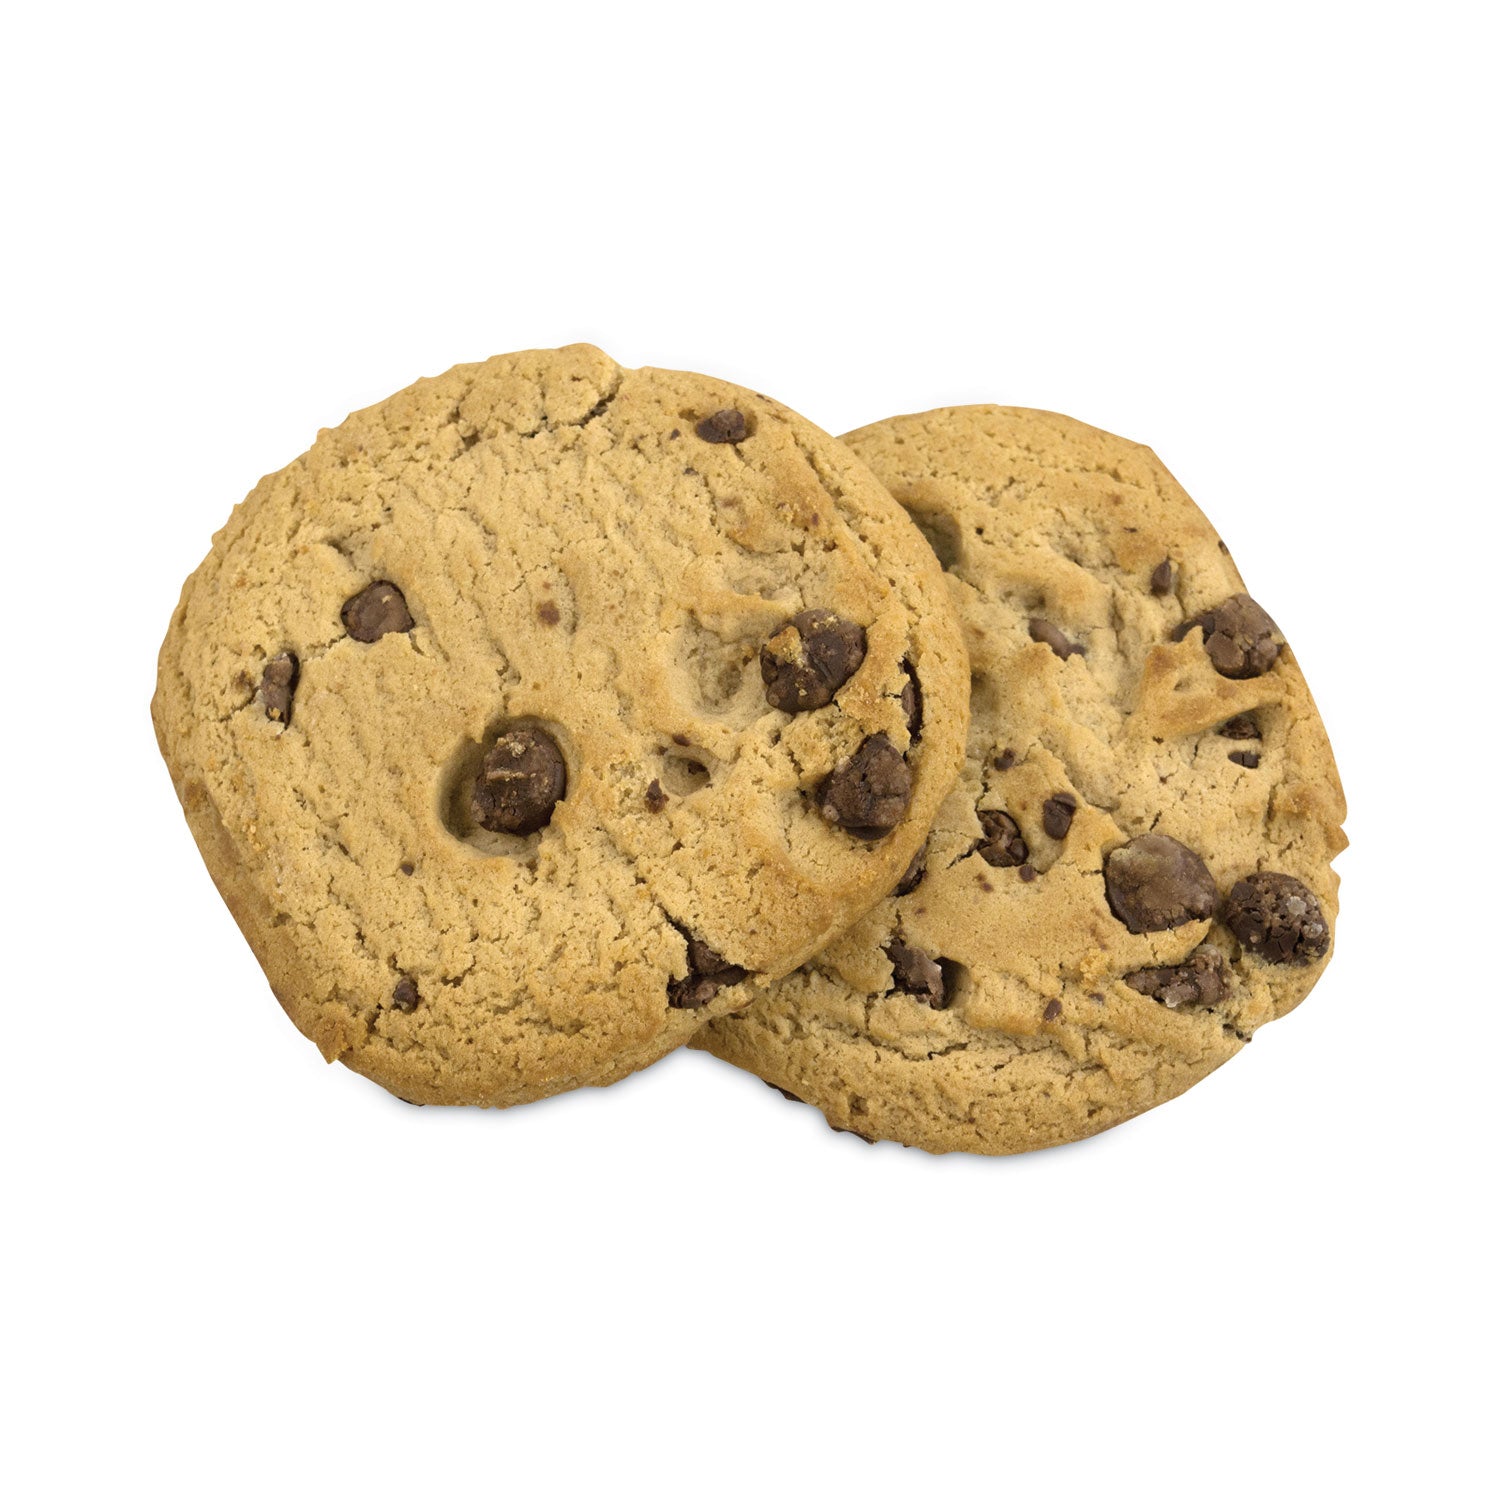 homestyle-chocolate-chip-cookies-25-oz-pack-2-cookies-pack-60-packs-carton-ships-in-1-3-business-days_grr29500060 - 2